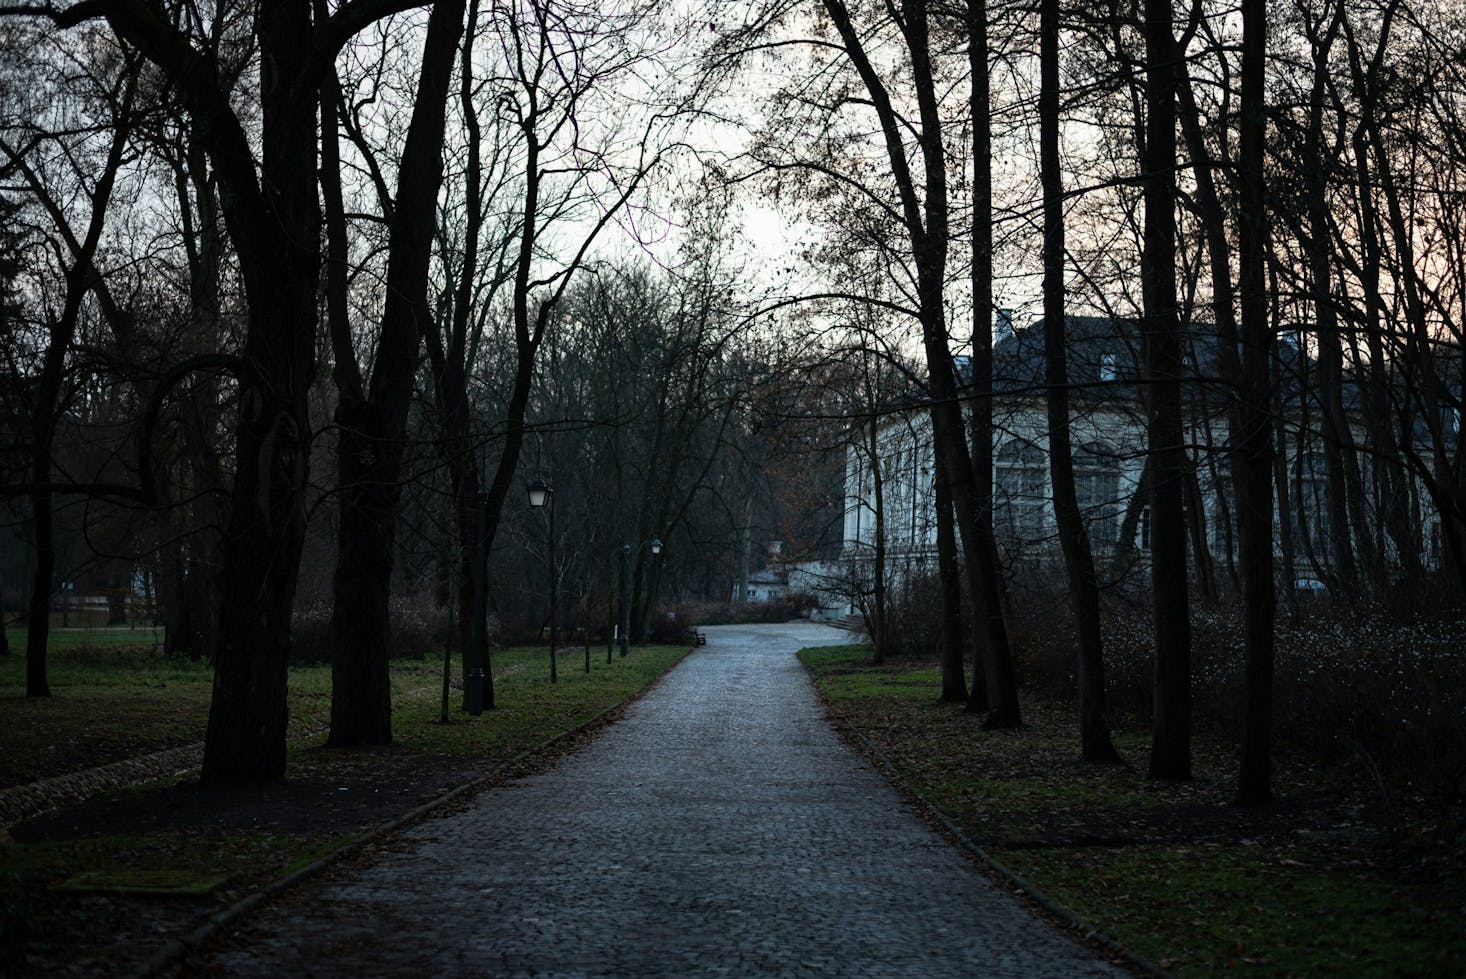 Late afternoon in a park with bare trees and a white building in the background